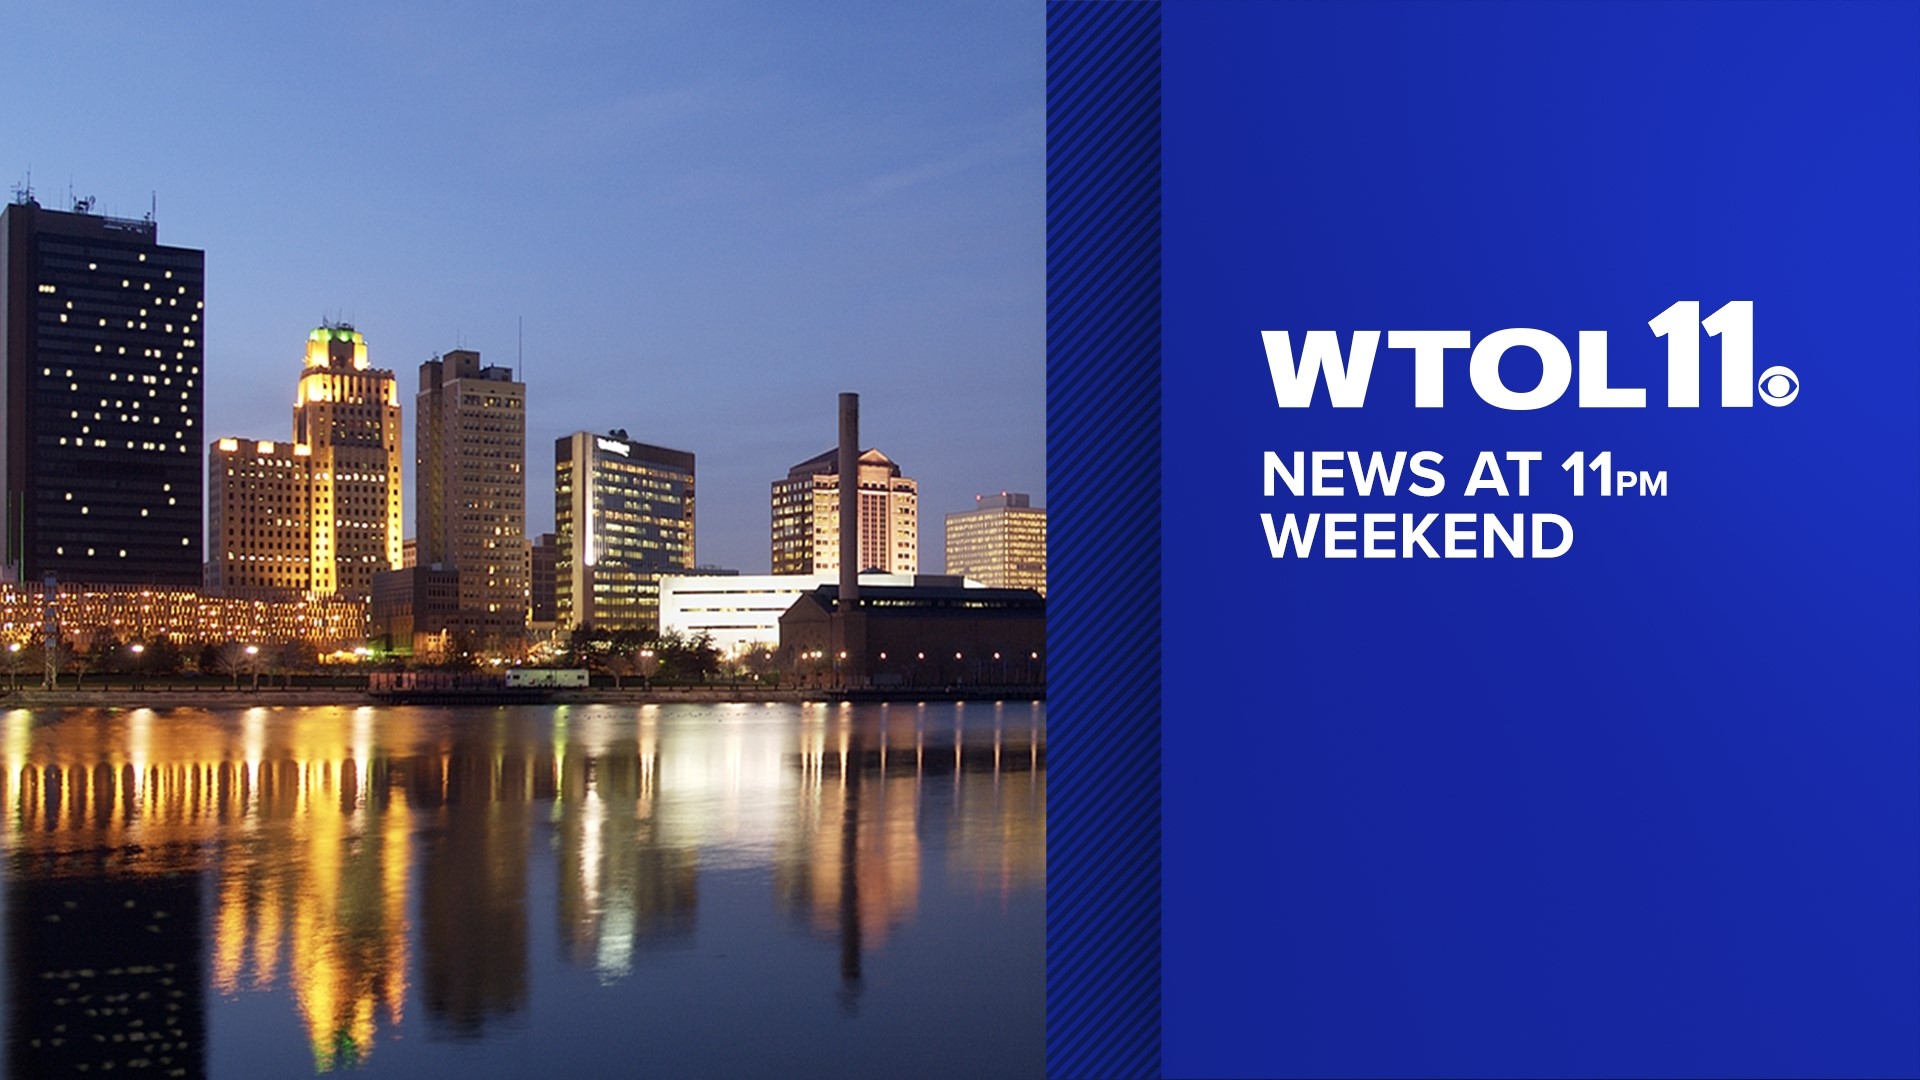 The weekend news team presents a comprehensive look at the news events of the day, as well as updates on local weather conditions and rush-hour traffic.